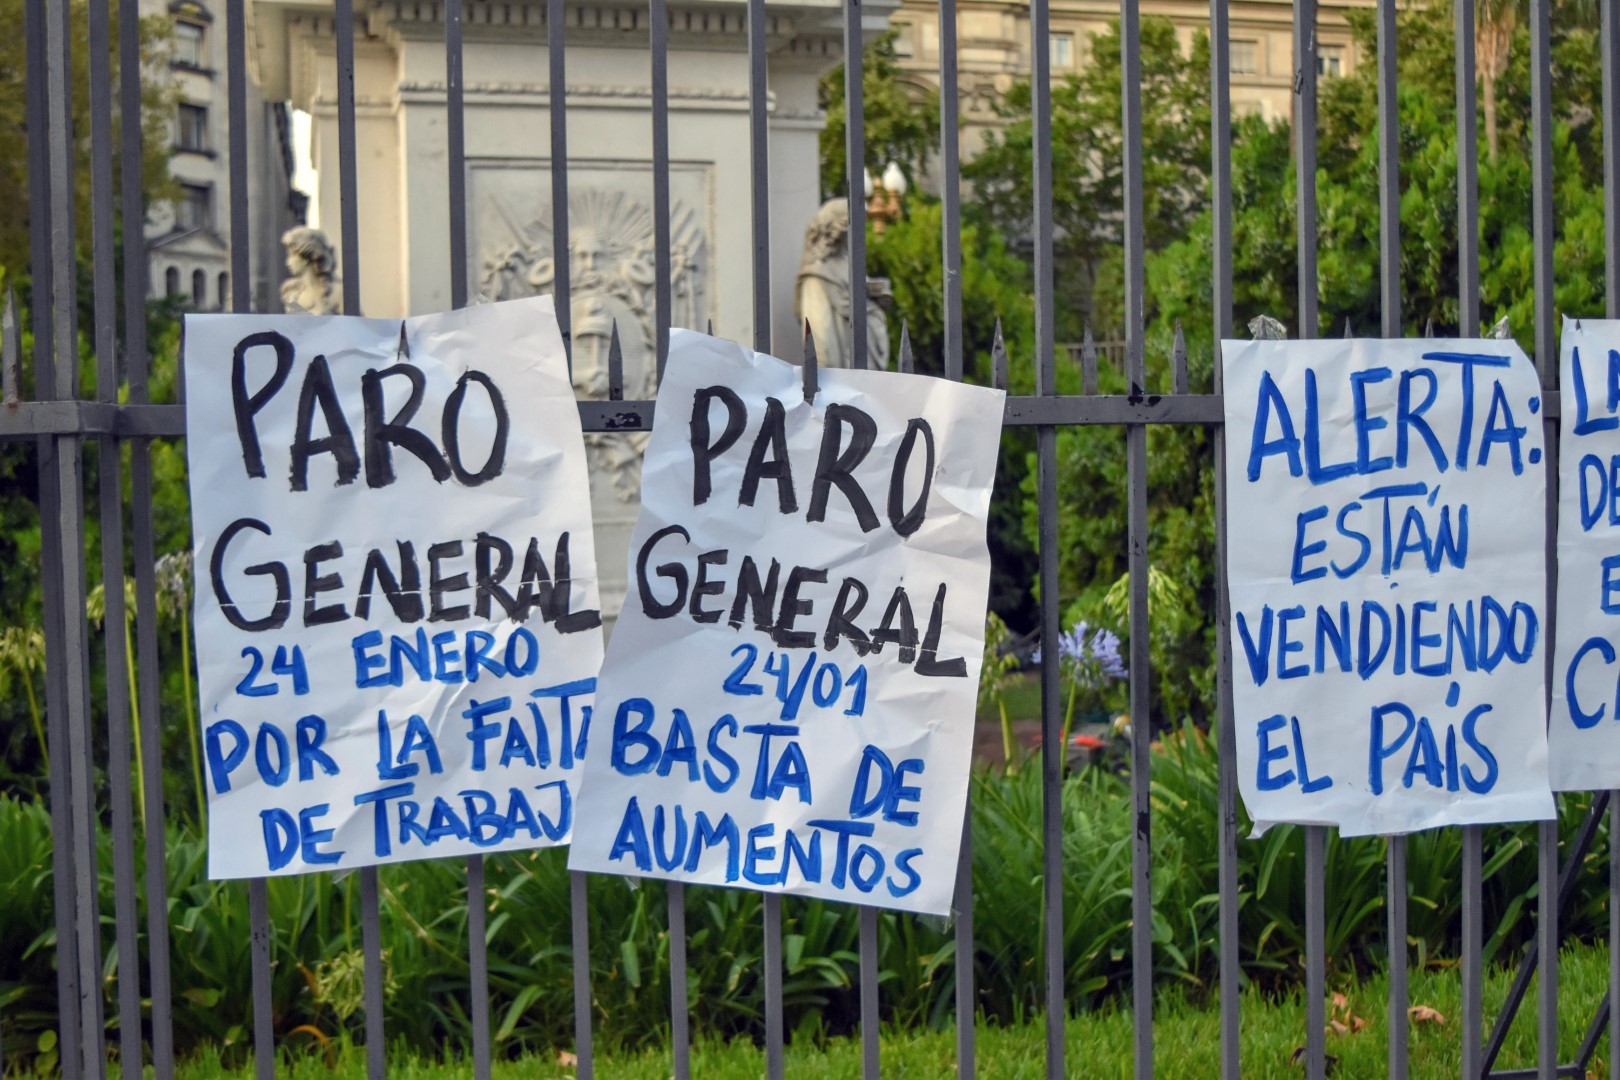 National strike day announced, Plaza de Mayo, Buenos Aires